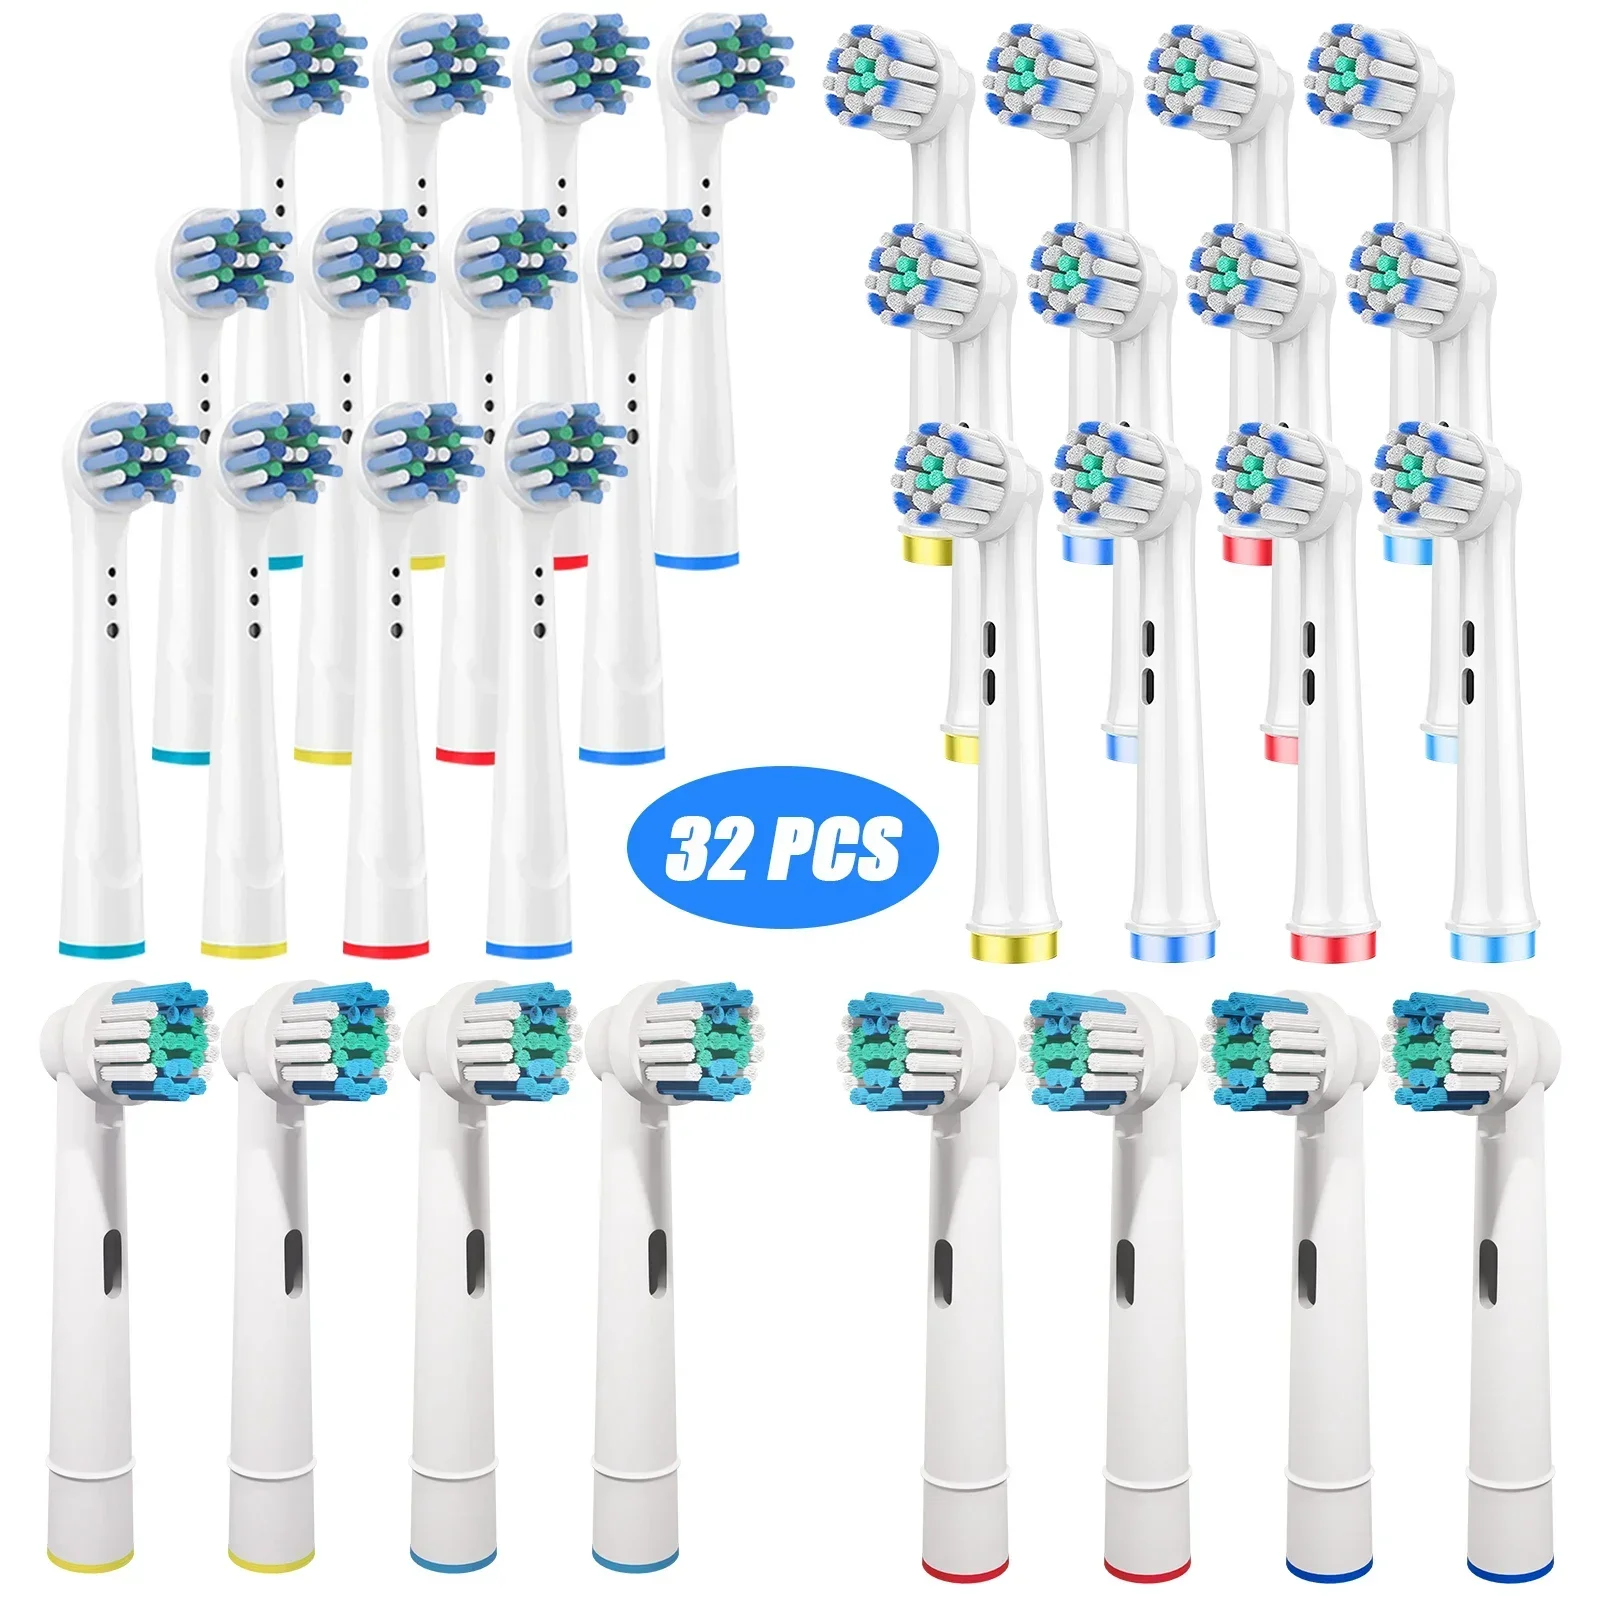 

32PCS Electric Toothbrush Heads Refill Fits Oral b Braun PRECISION CLEAN Replacement Tooth Brush Heads Compatible Oral B 3 Types